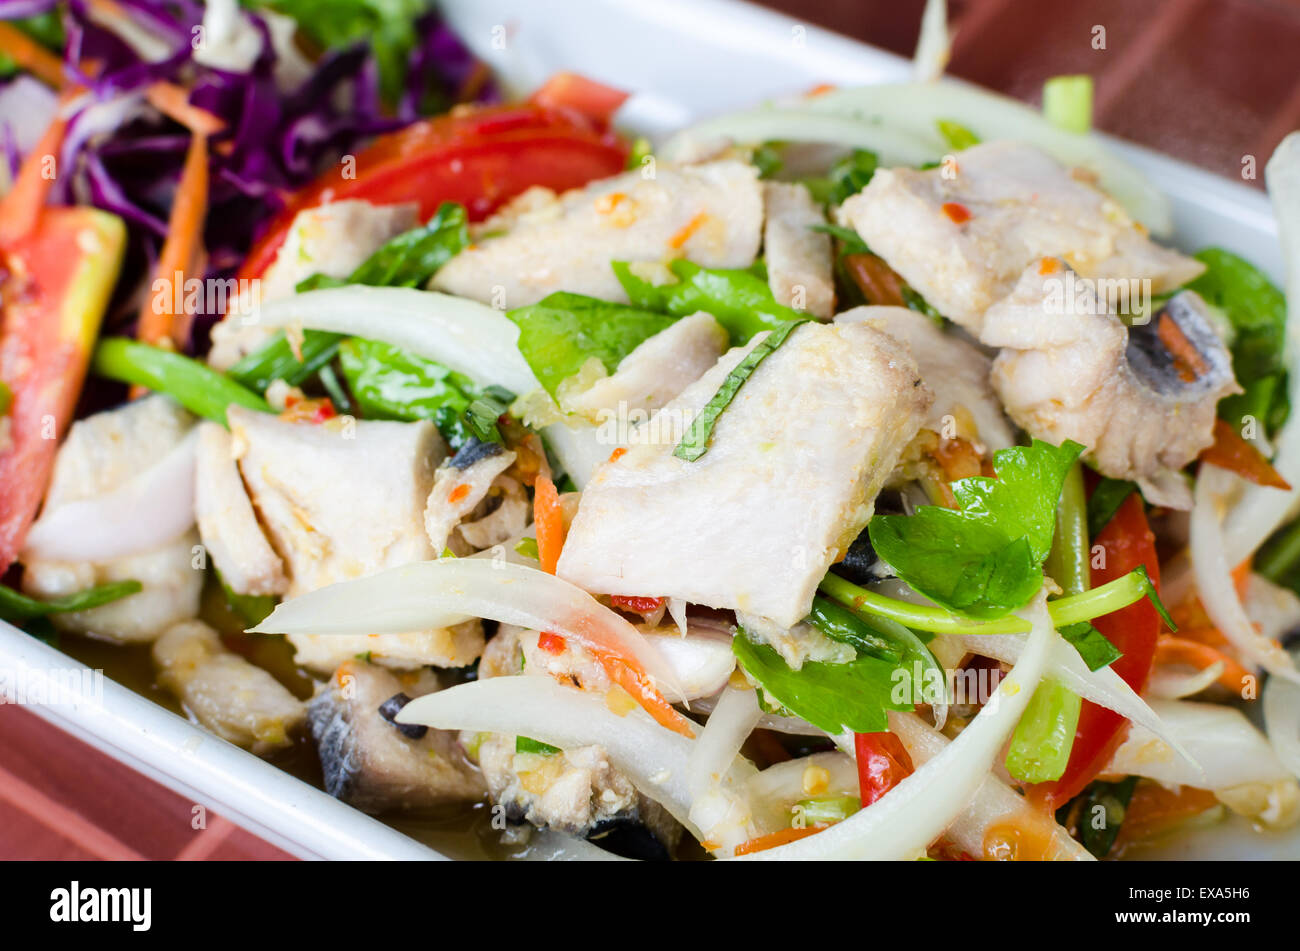 Spicy mackerel salad mix with onion, chili, coriander and lime juice. spicy sweet sour flavor. Stock Photo